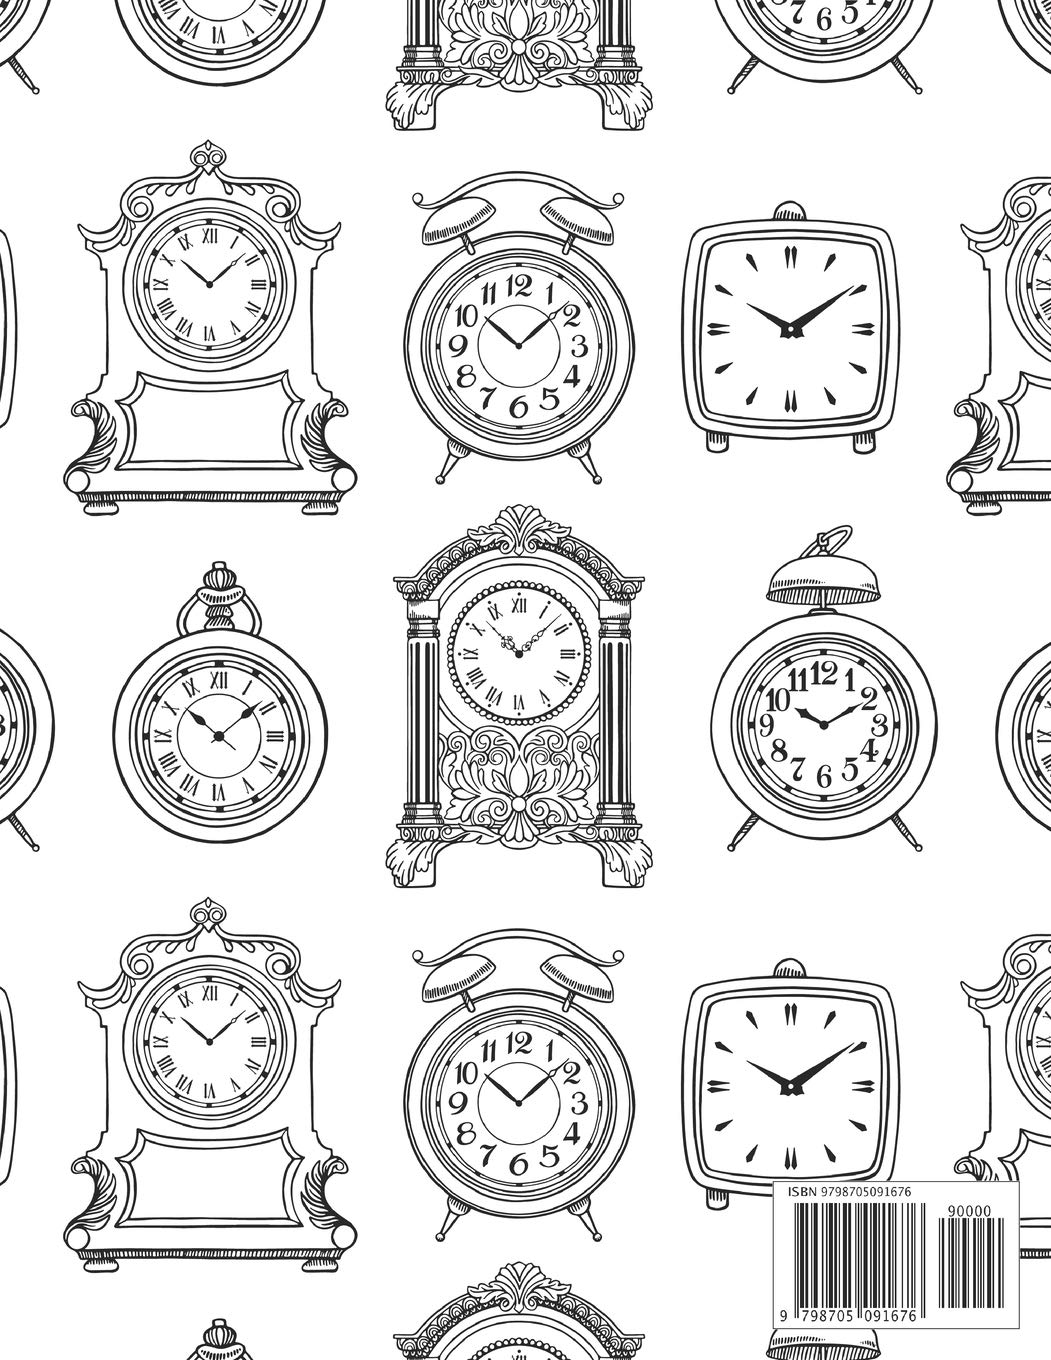 Clocks coloring book: Vintage clocks, old clocks, classic watches coloring book / clock collector gift idea / clock lover present